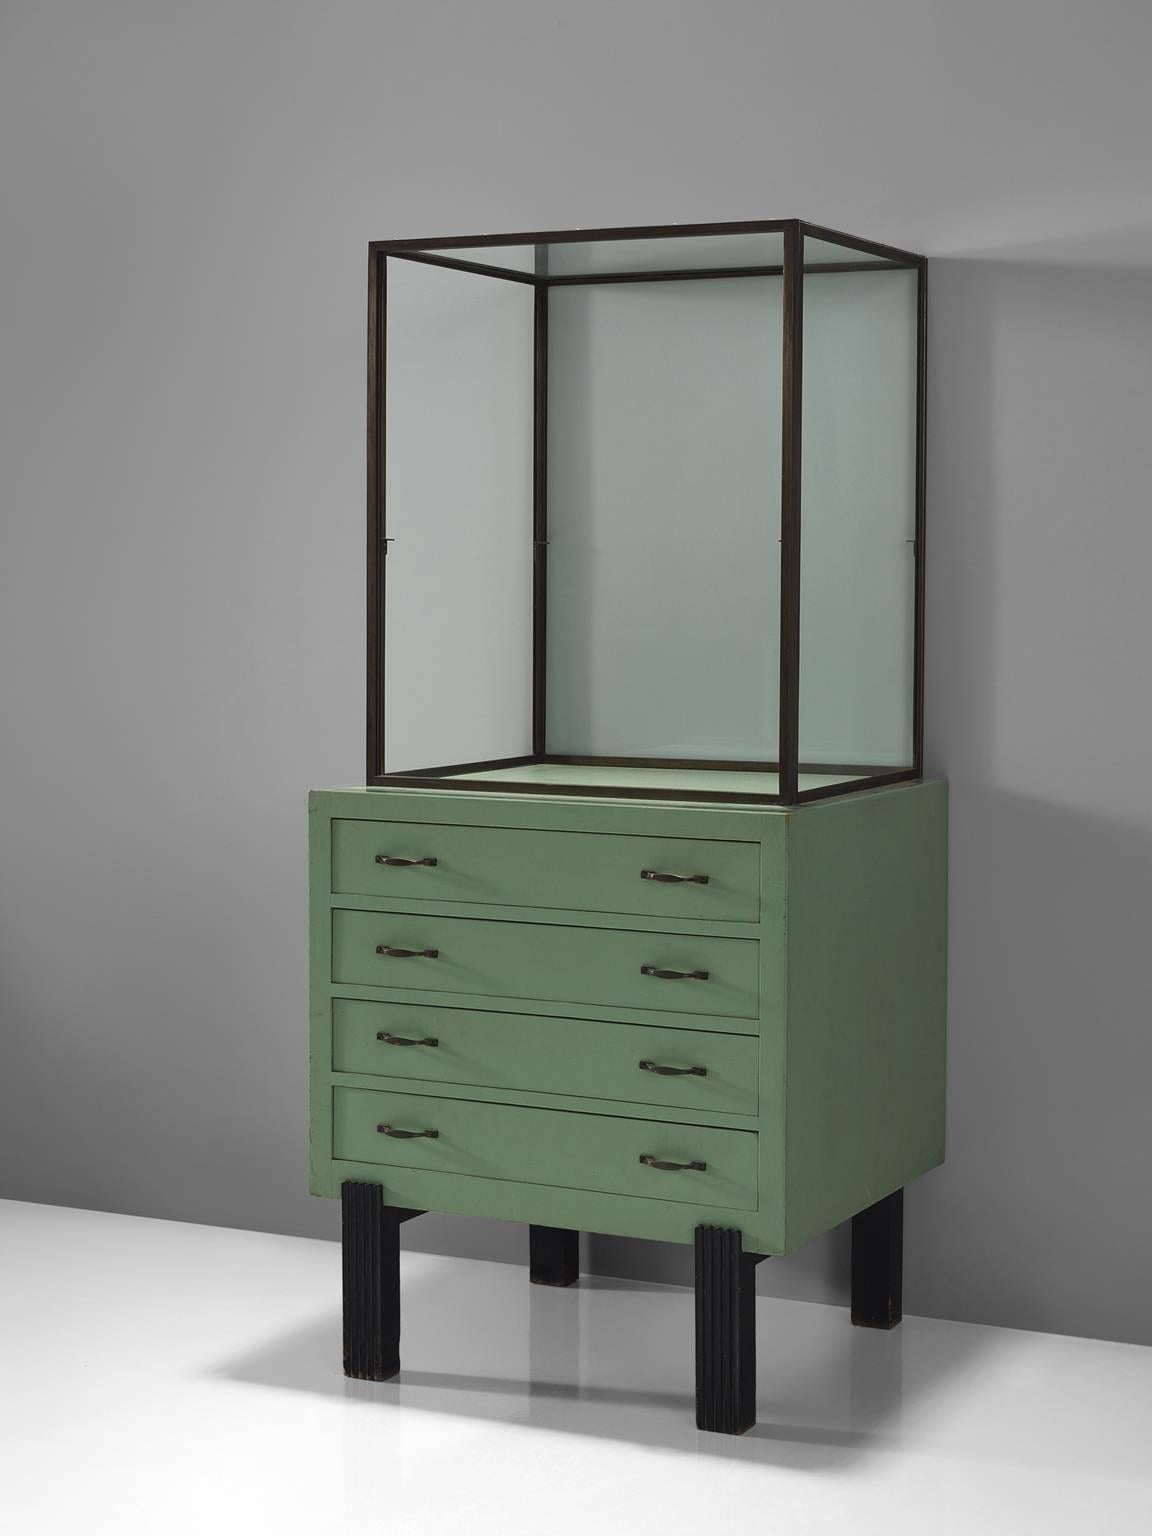 Showcase, metal, wood, glass, Belgium, circa 1940.

Robust midcentury showcase in glass and wood with metal handles. The base of this vitrine is beautifully simply designed as it features four square black feet. The drawers of the bottom cabinet